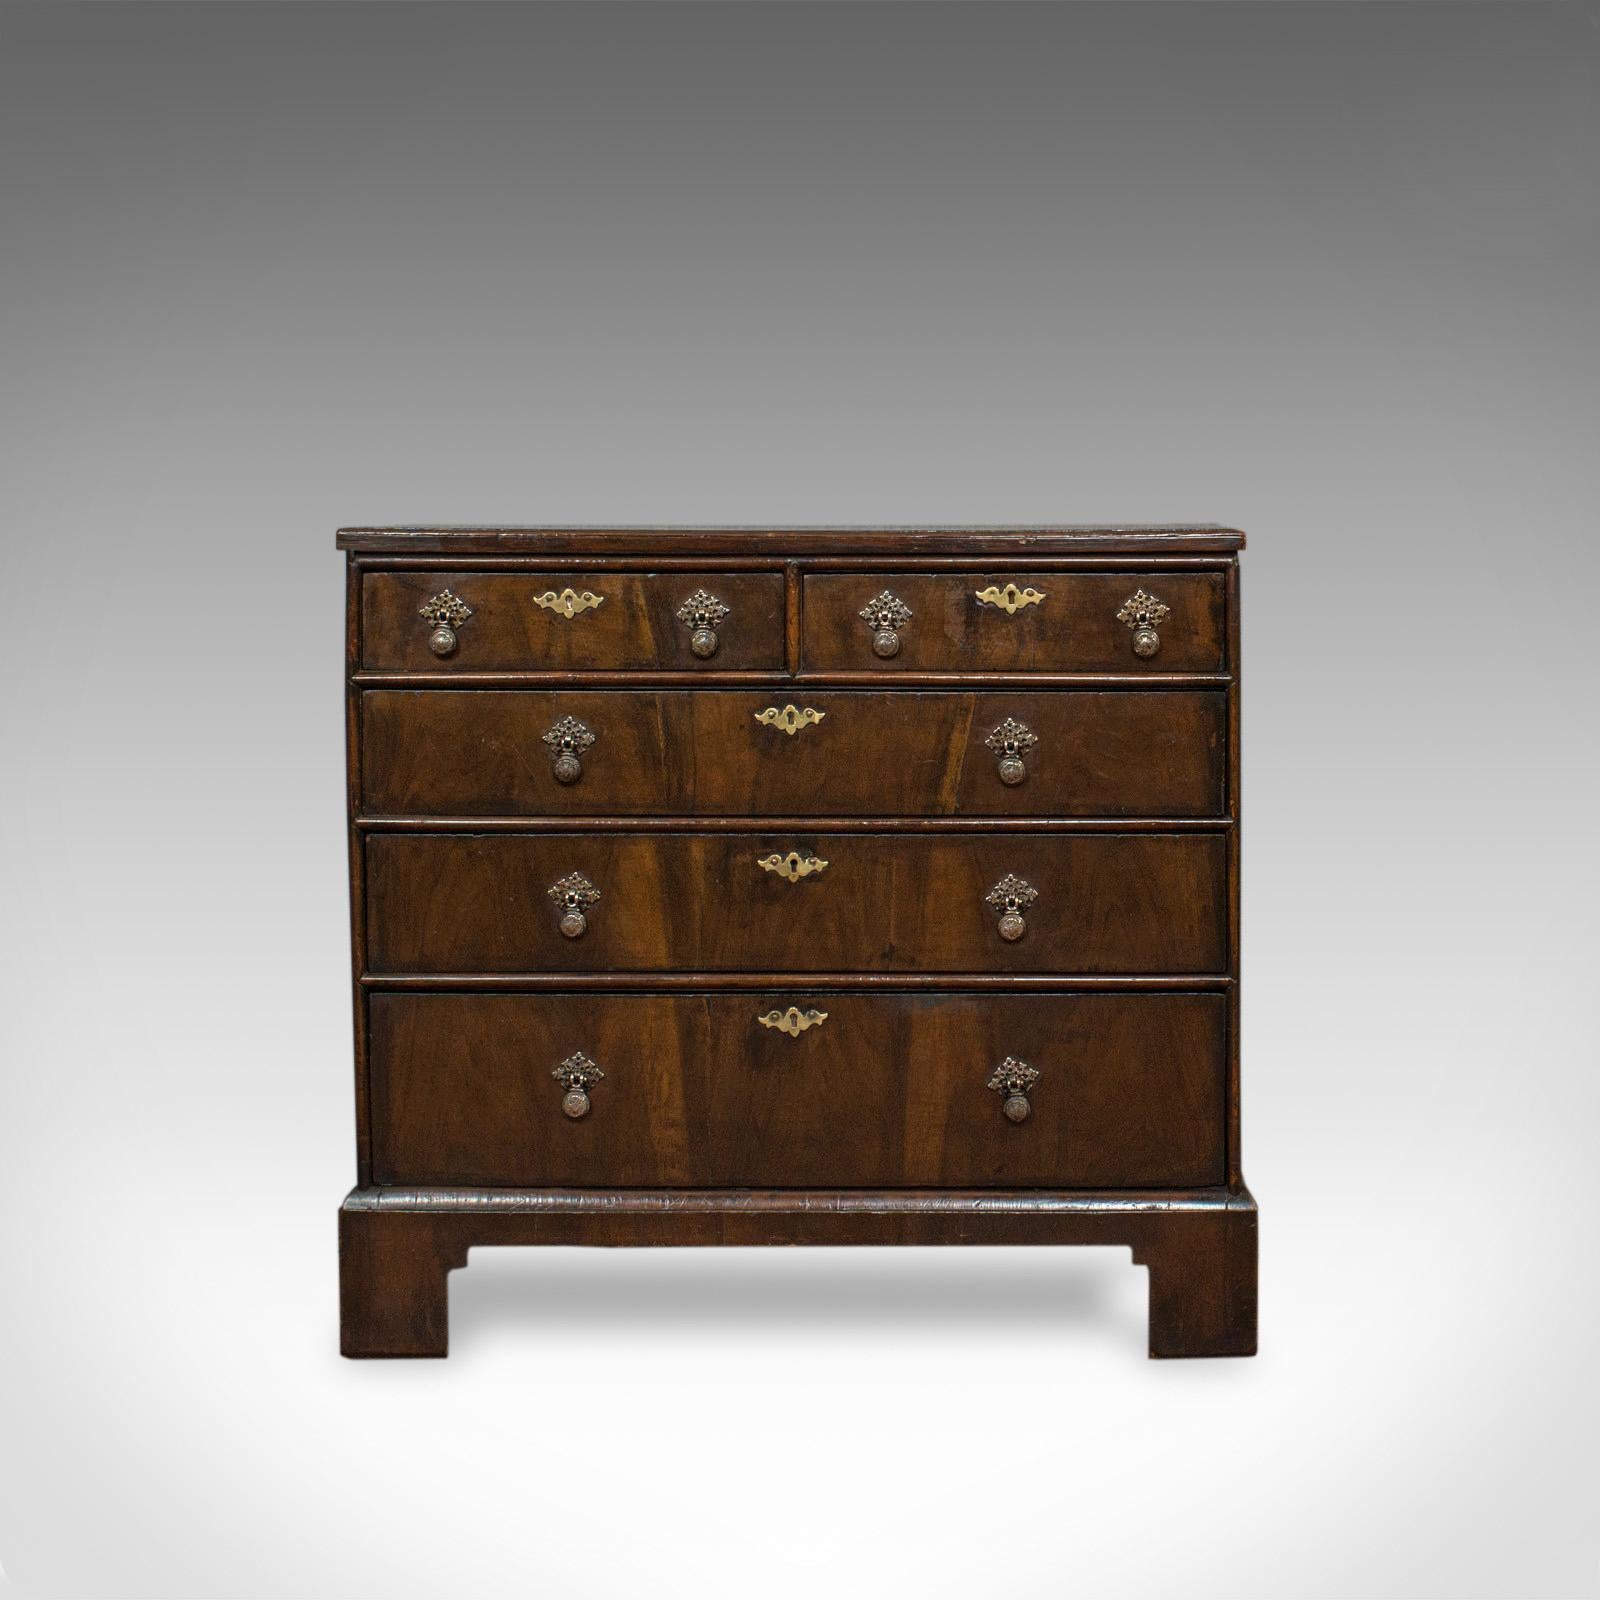 This is an antique chest of drawers. An English, Regency mahogany chest of compact proportion, dating to the early 19th century, circa 1820.

Deep, rich tones to the select mahogany
Desirable aged patina in the lustre of the wax polished